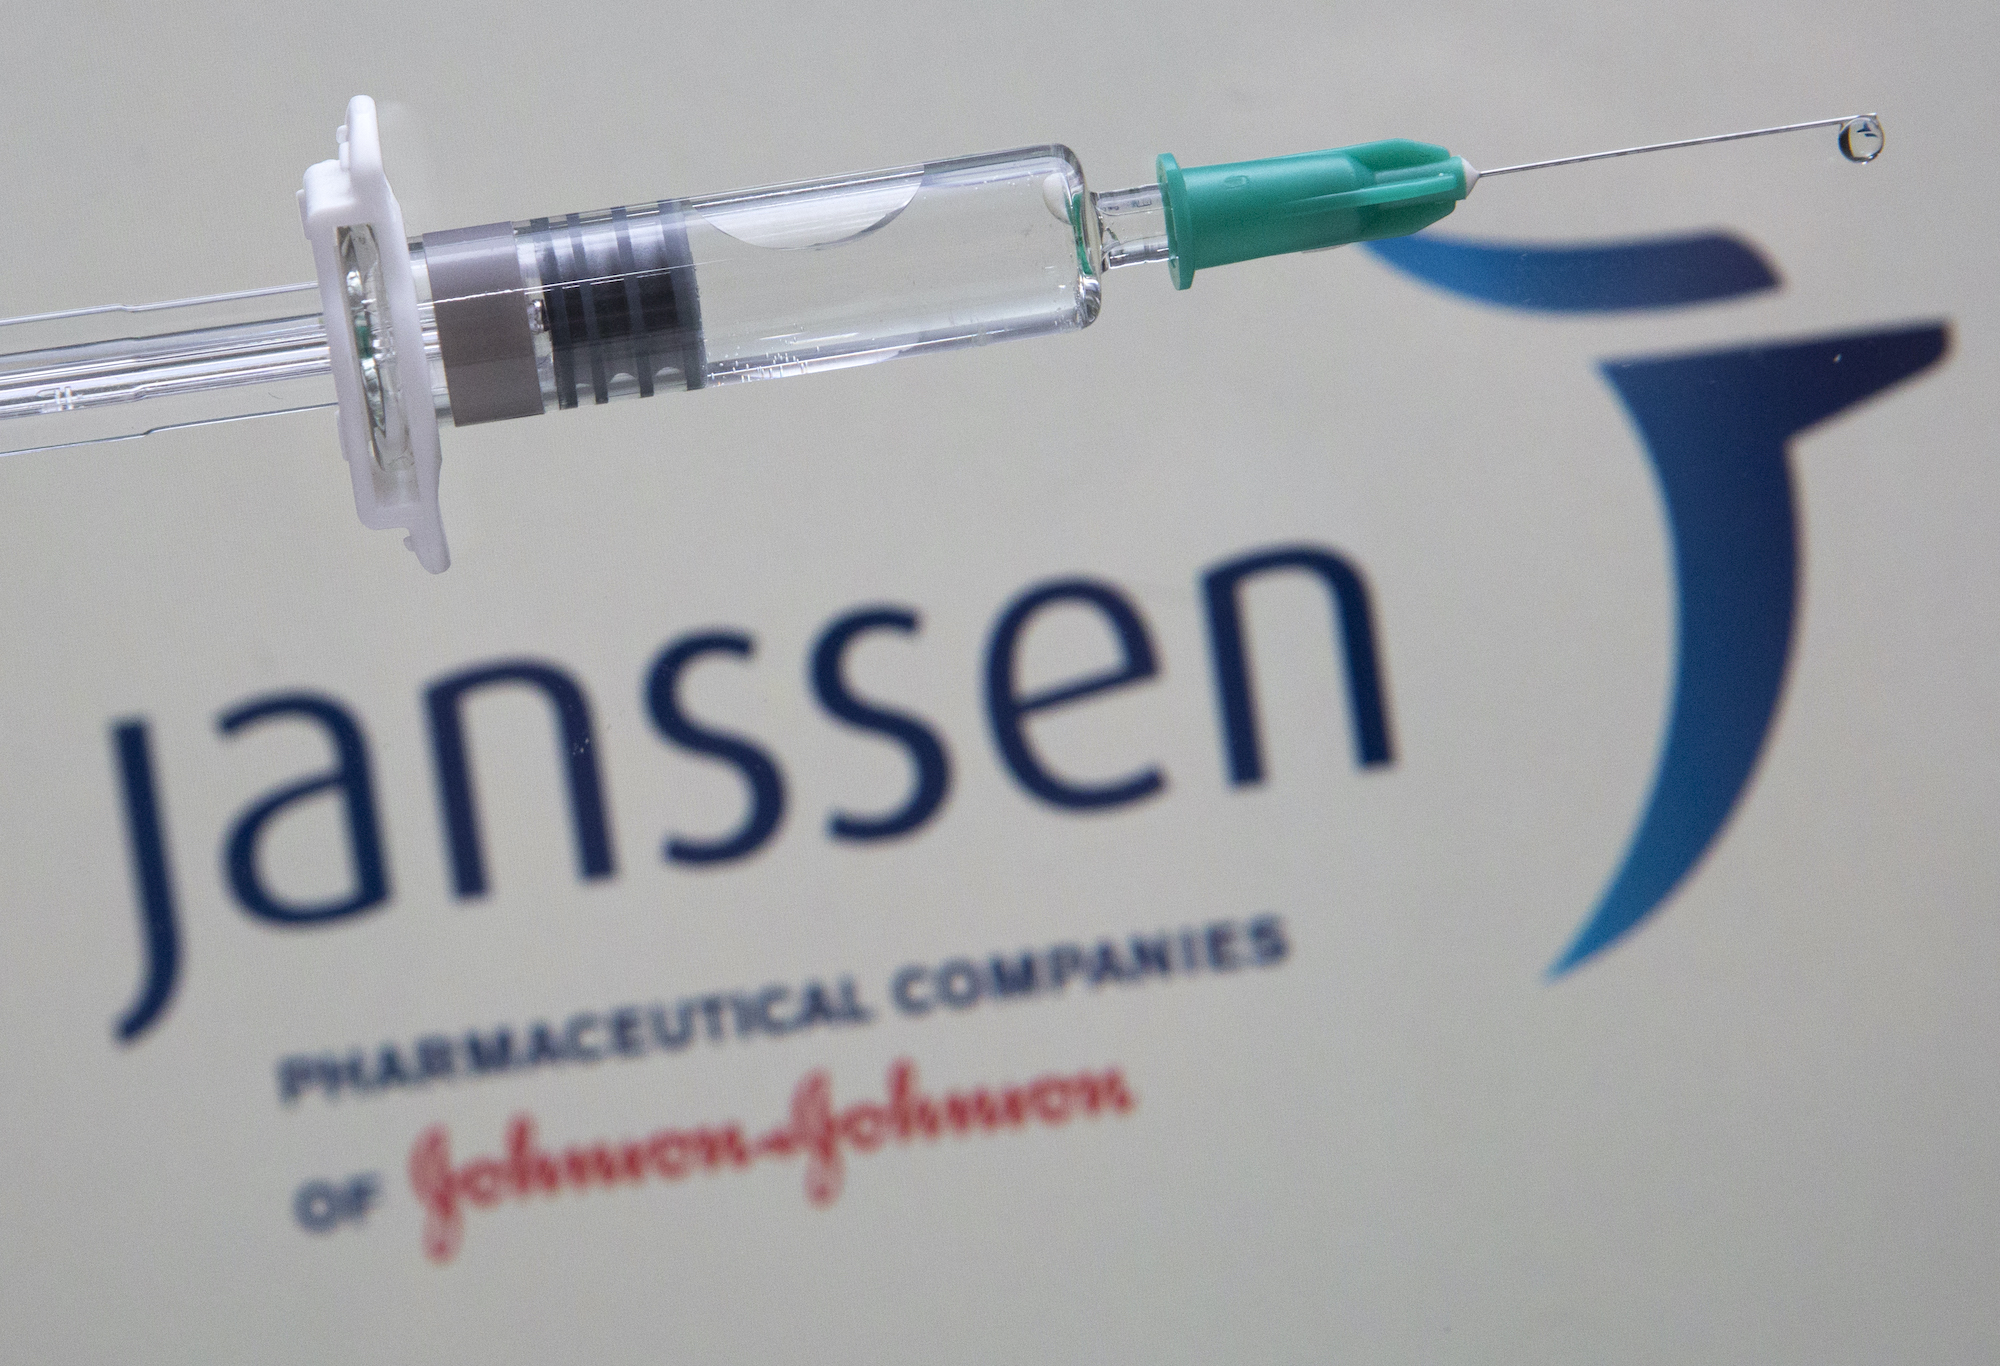 Johnson & Johnson's one-shot COVID-19 vaccine was developed by the company's pharmaceutical arm, Janssen. Photo: TIME.